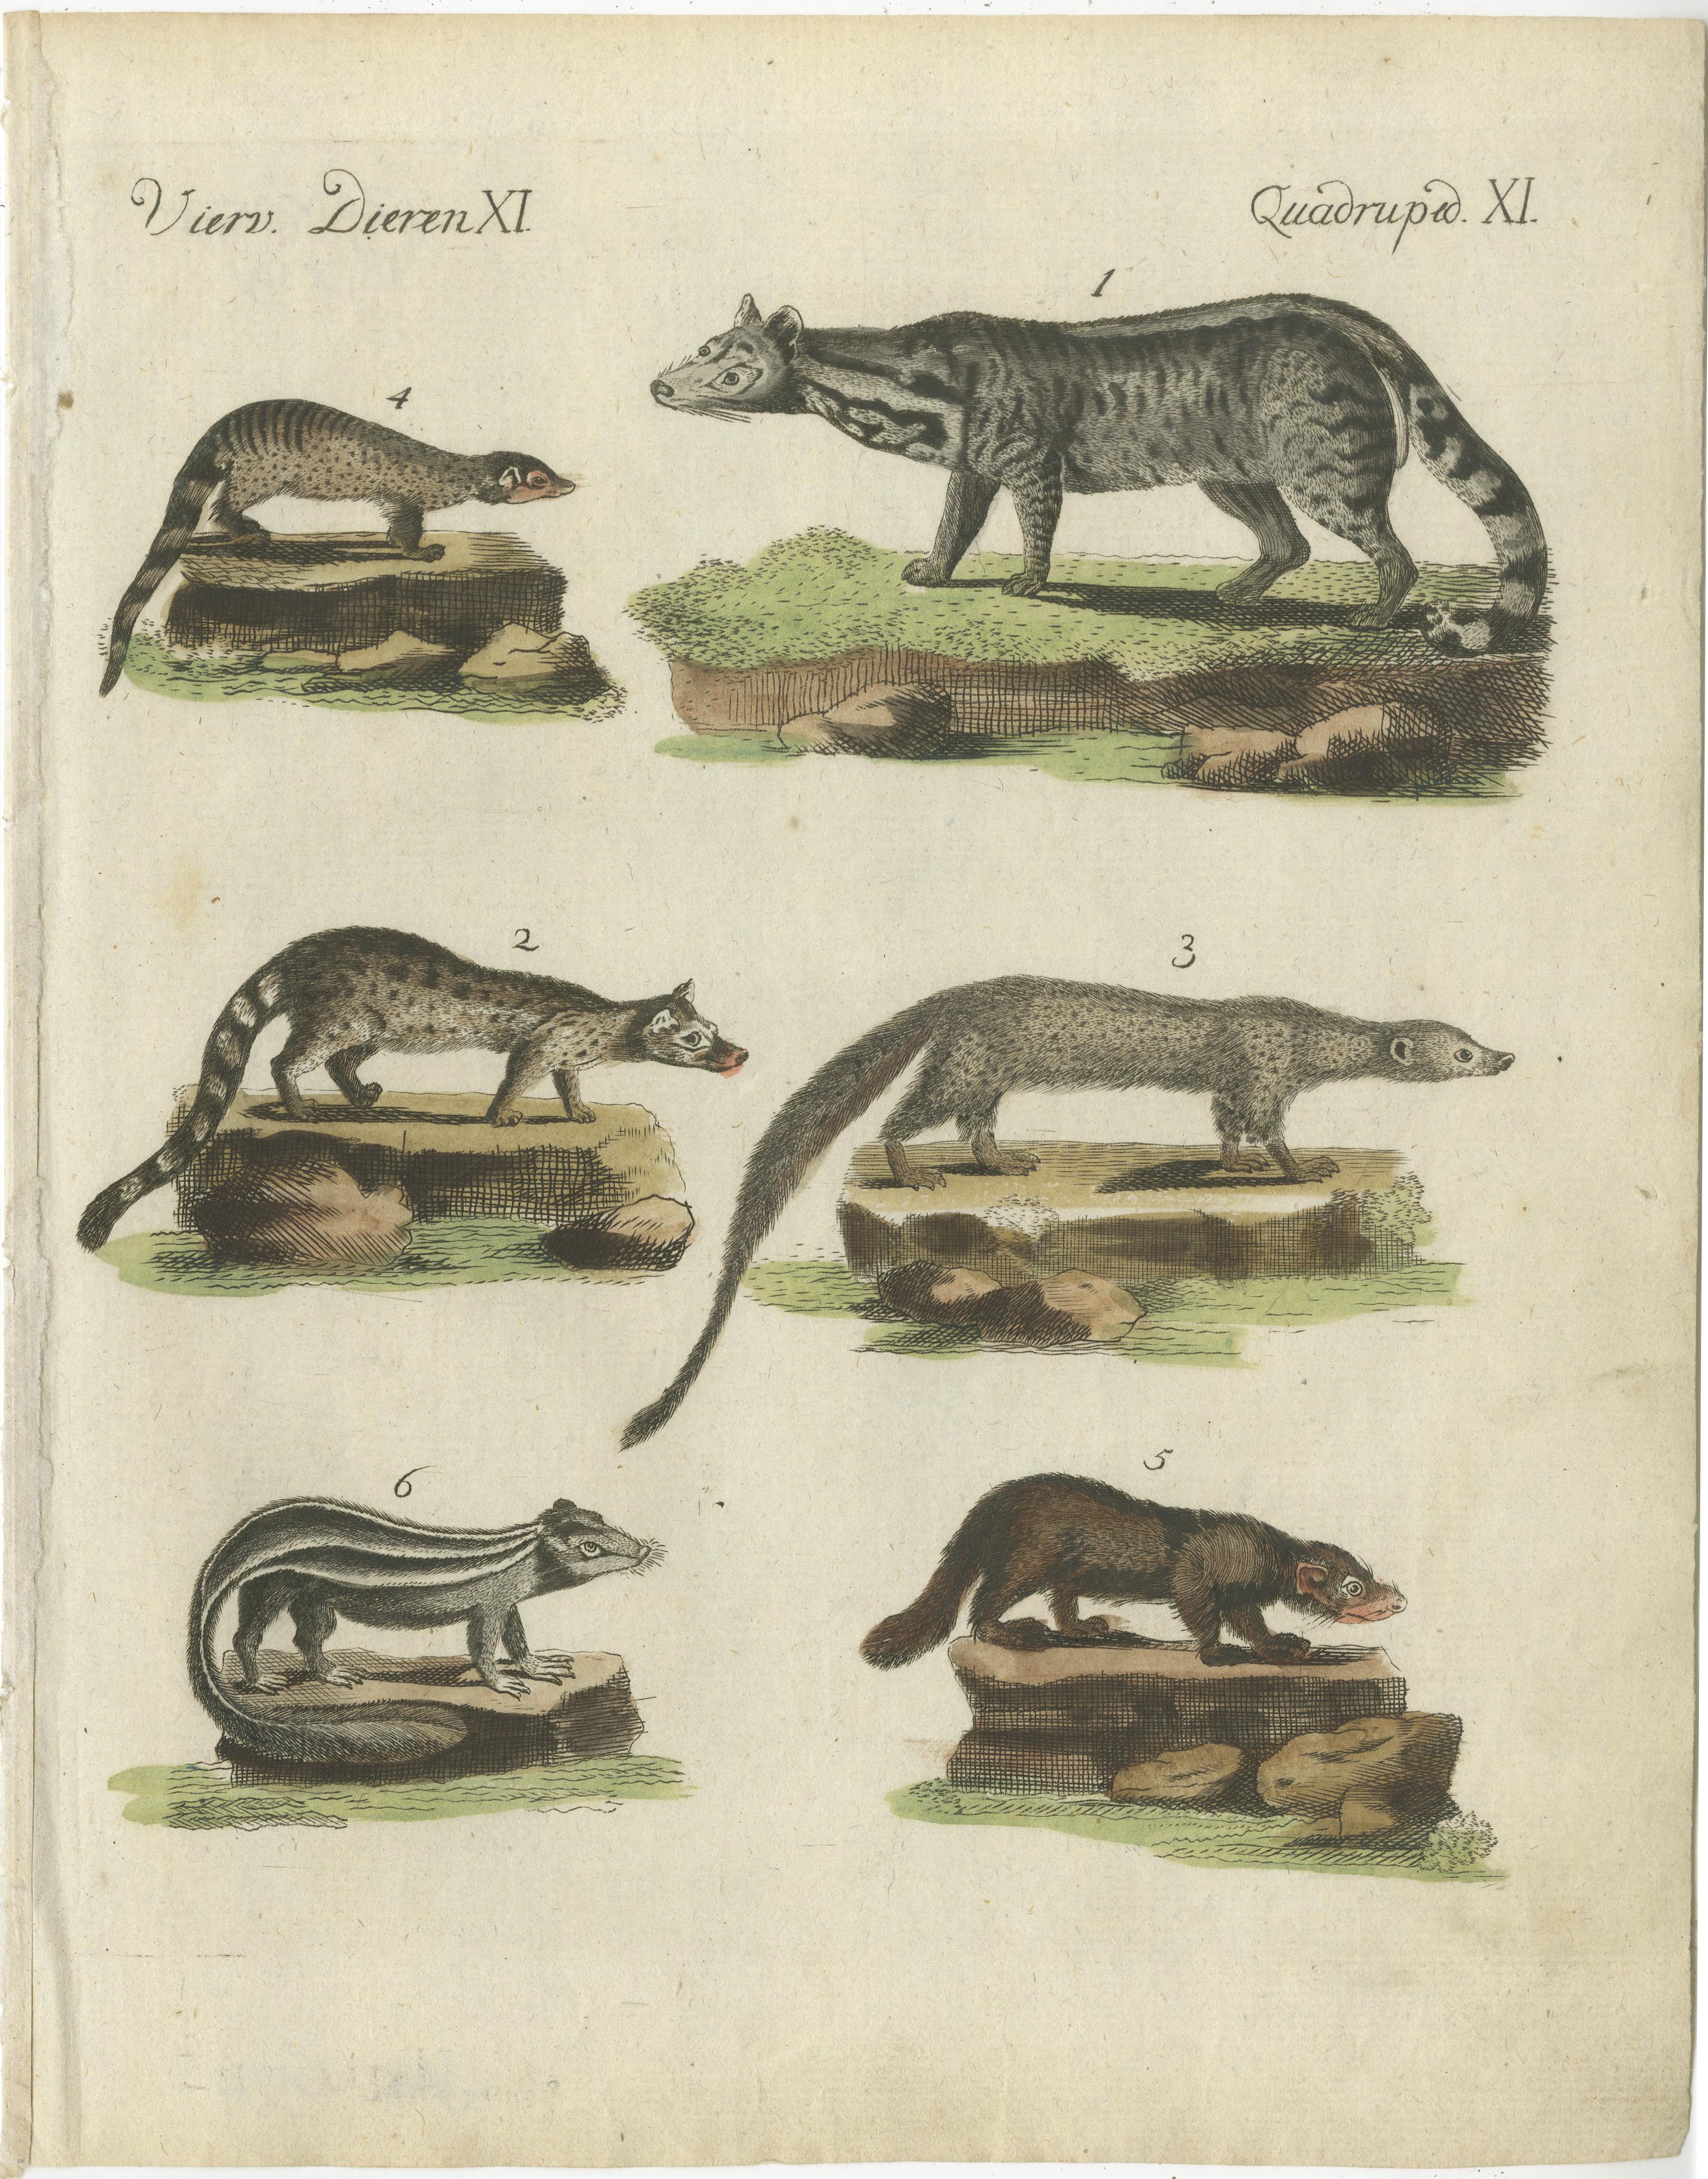 Original antique print of a civet and skunks. This engraved print originates from a very rare unknown Dutch work. The plates are similar to the plates in the famous German work: ‘Bilderbuch fur Kinder' by F.J. Bertuch, published 1790-1830 in Weimar.